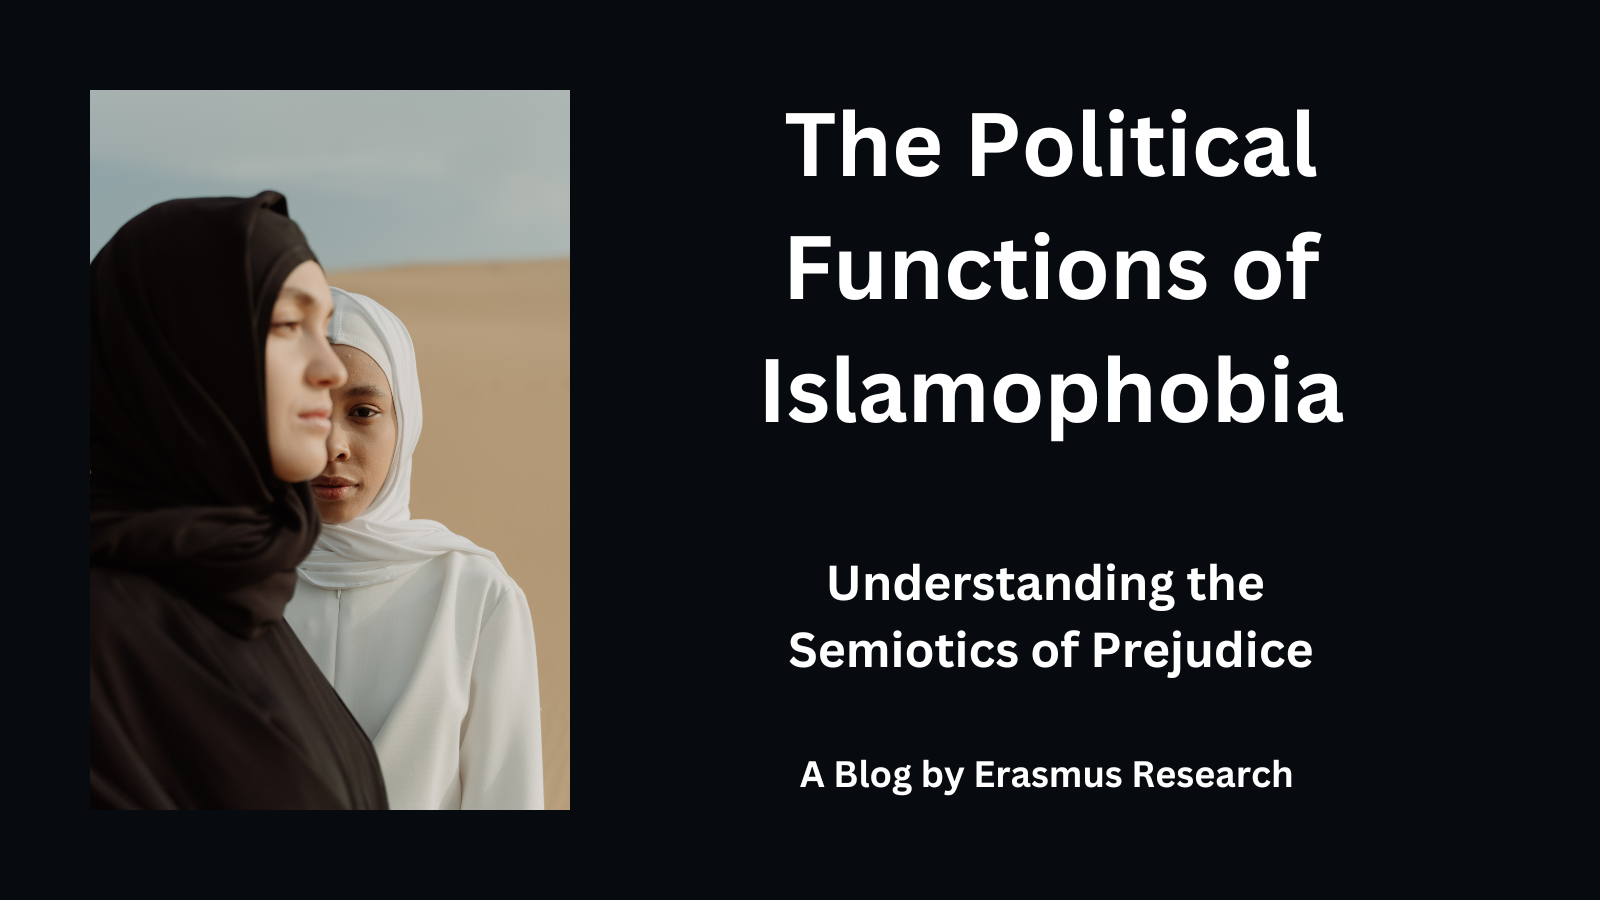 The Political Functions of Islamophobia